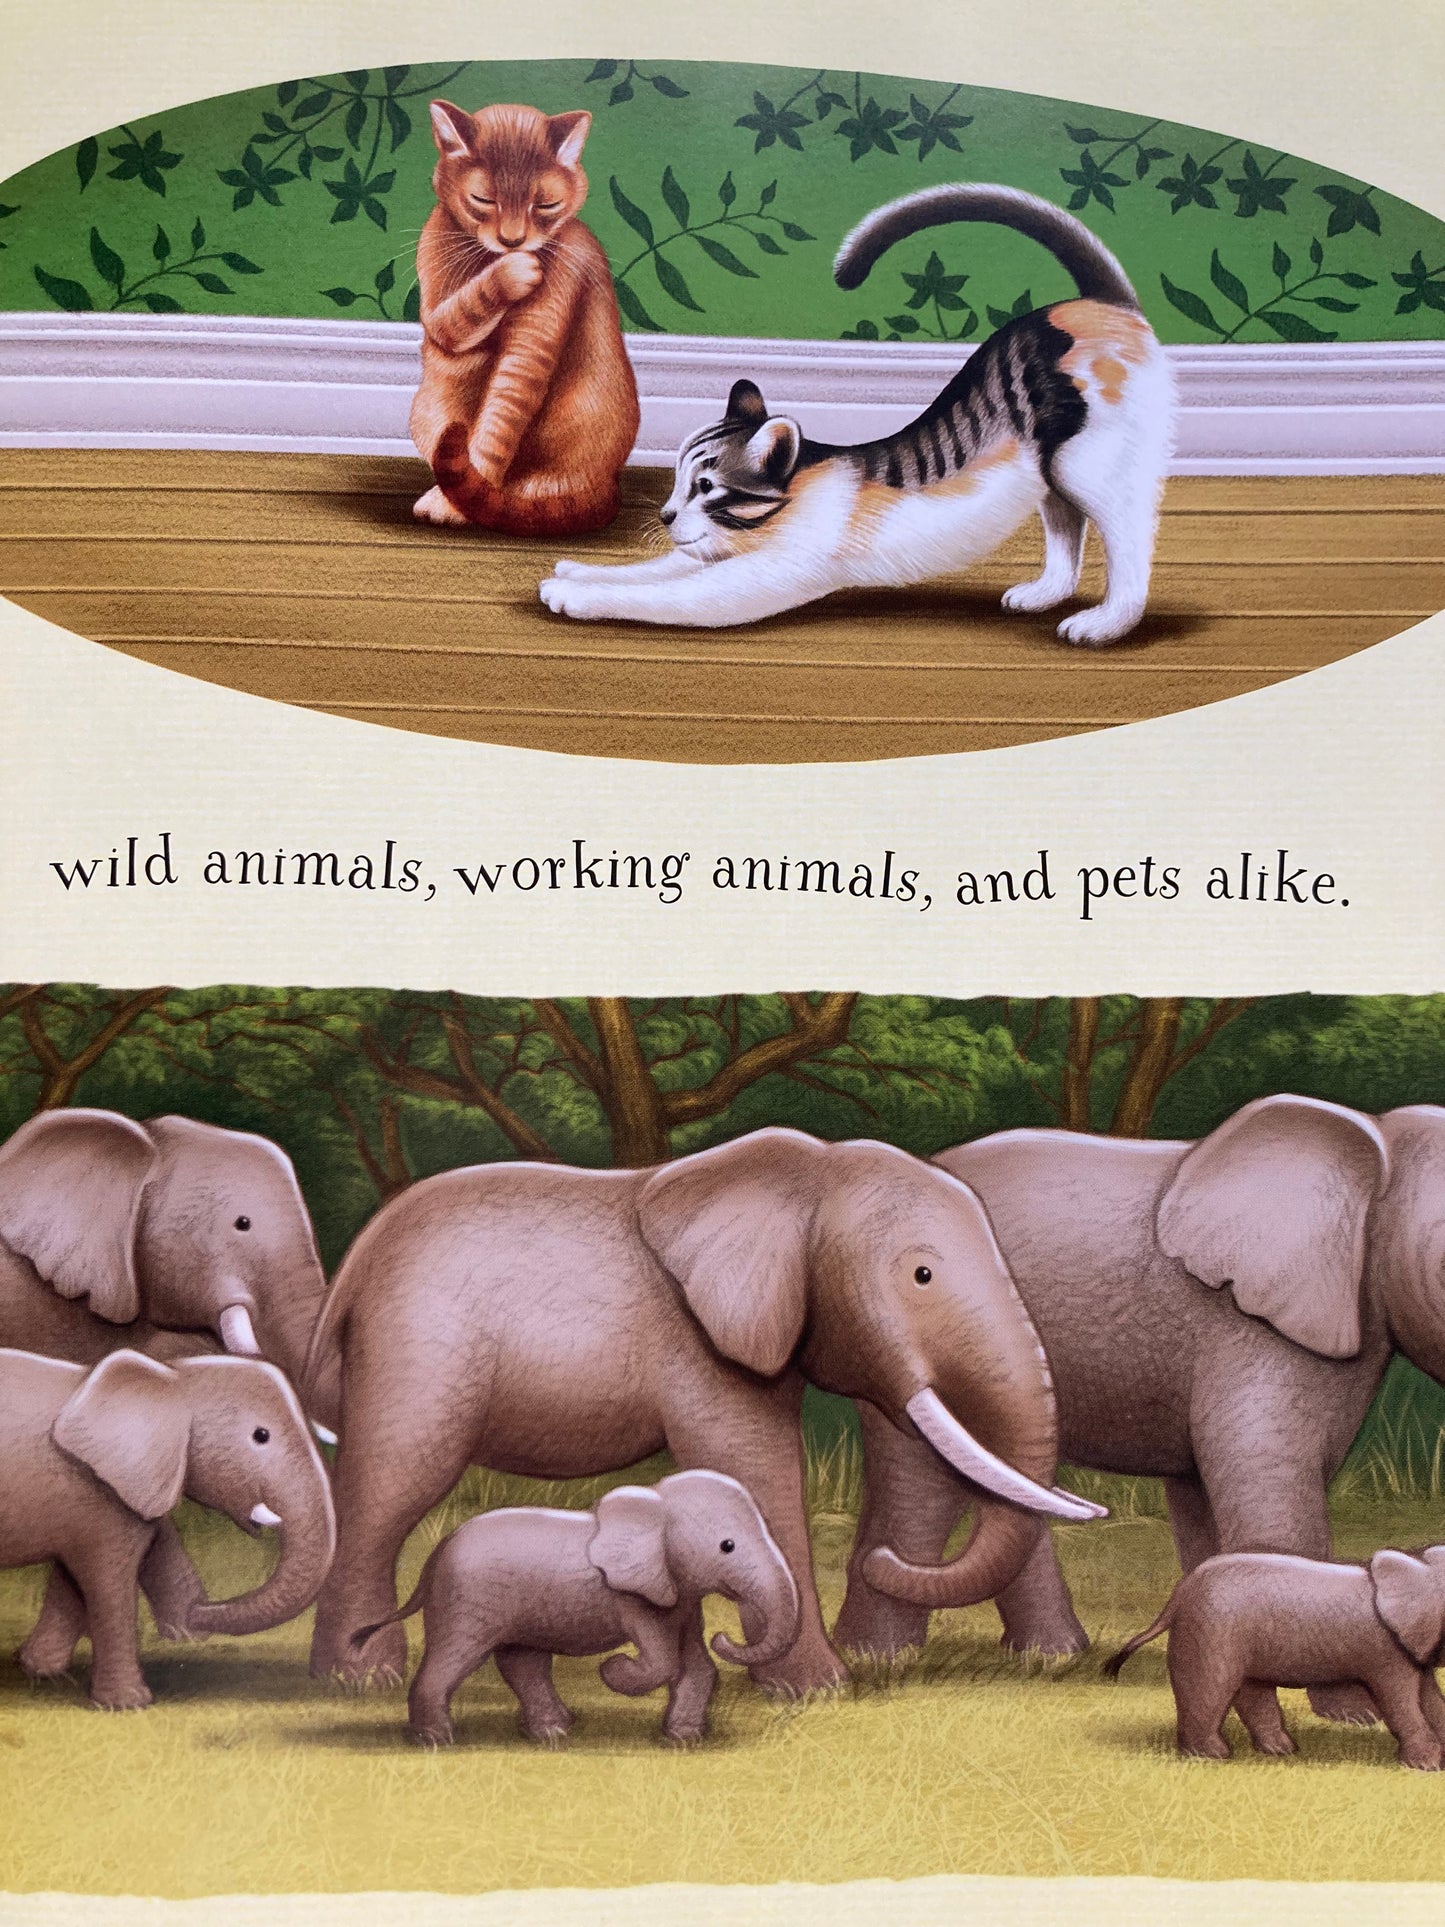 Children’s Picture Book - A PRAYER FOR THE ANIMALS